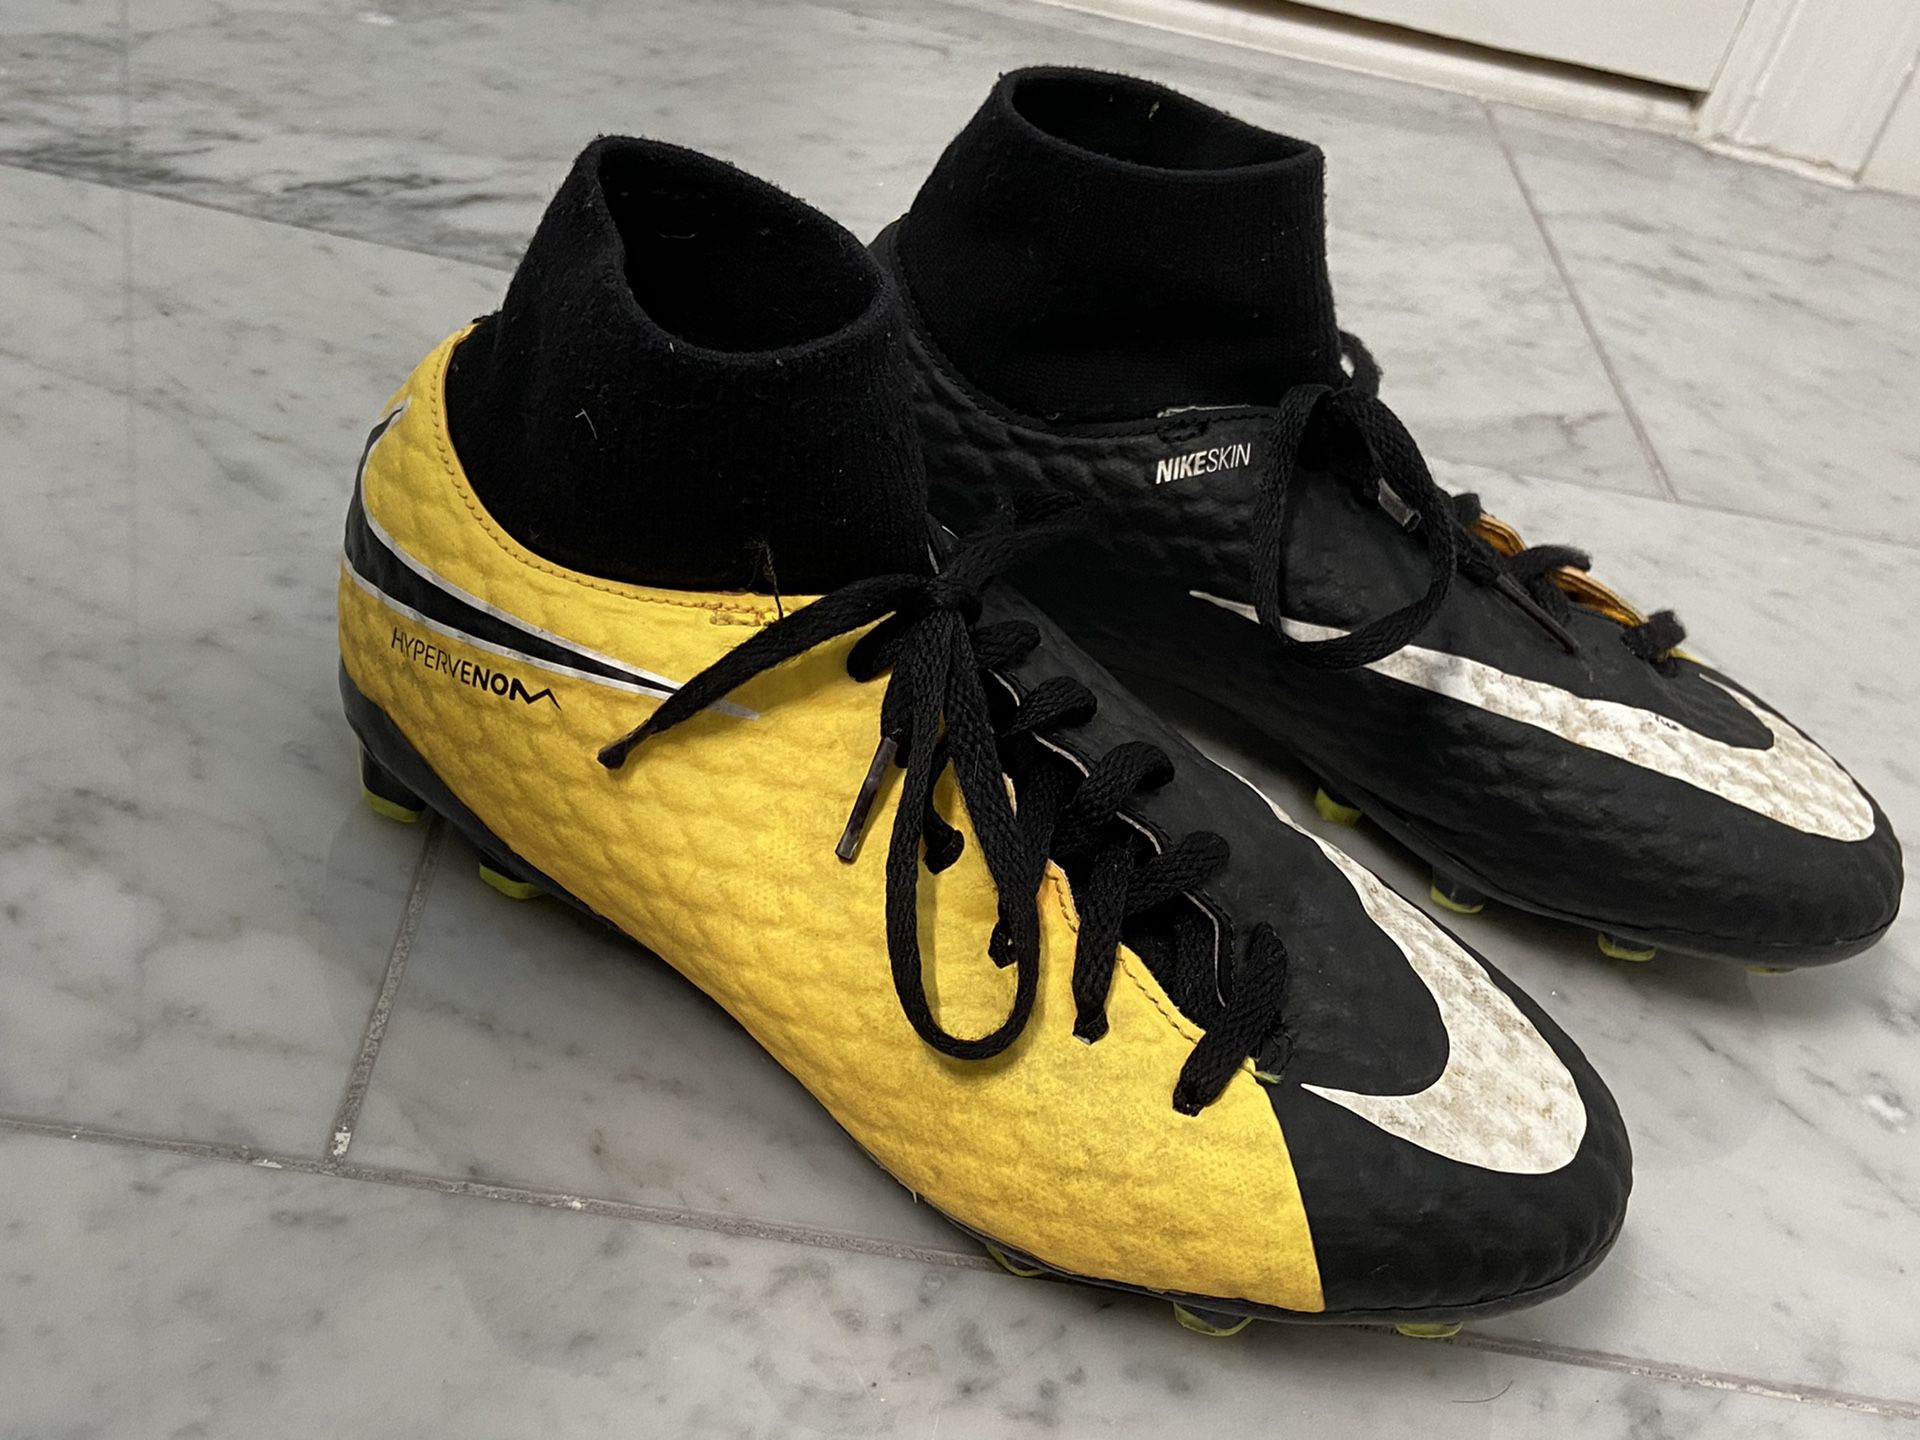 Nike black/yellow soccer cleats SIZE 5.5